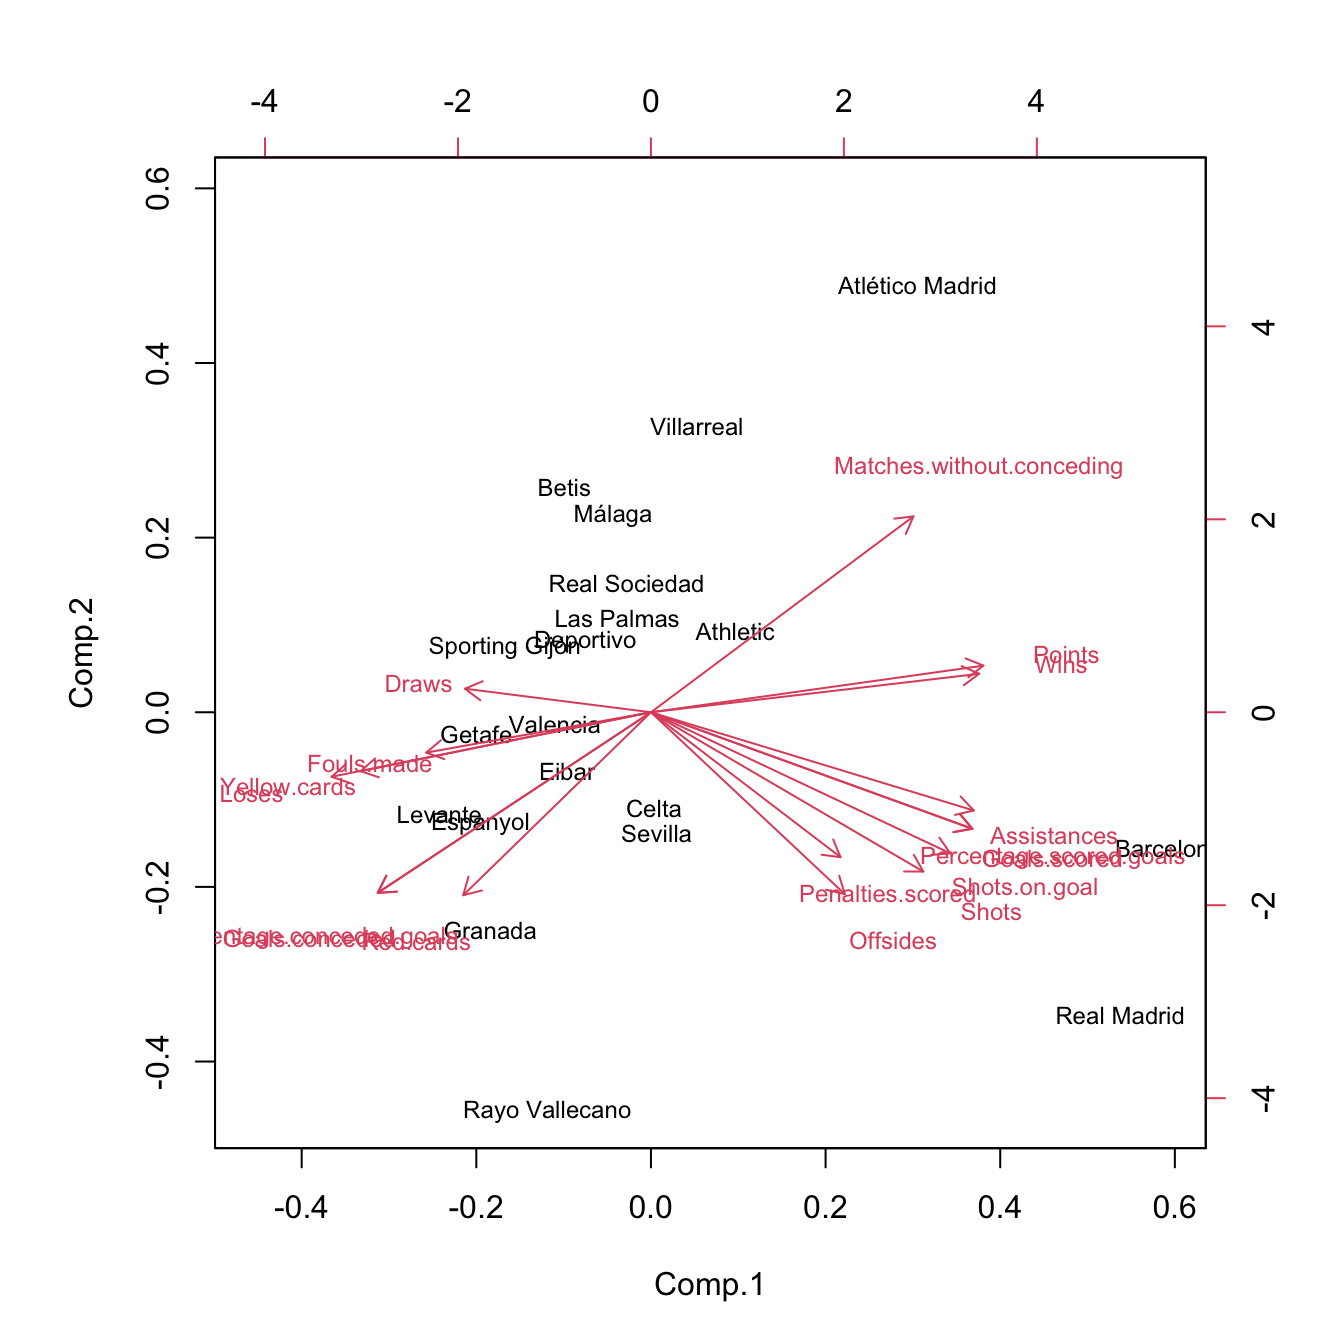 Biplot for laliga dataset. The interpretations of the first two principal components are driven by the signs of the variables inside them (directions of the arrows) and by the strength of their correlations with the variables (length of the arrows). The scores of the data serve also to cluster similar observations according to their proximity in the biplot.